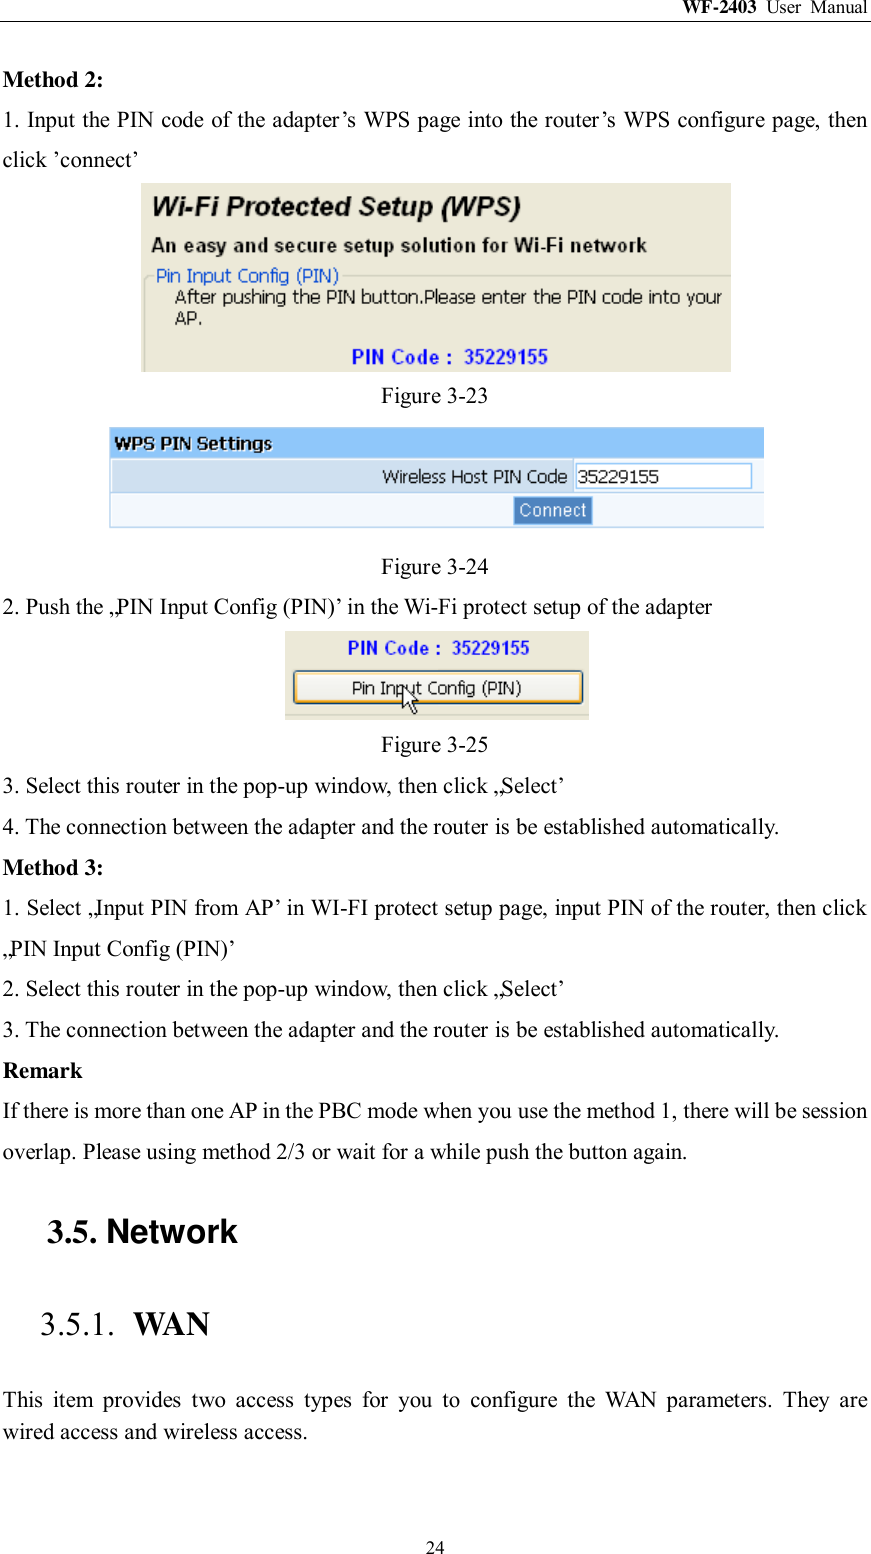 WF-2403  User  Manual  24 Method 2: 1. Input the PIN code of the adapter‟s WPS page into the router‟s WPS configure page, then click ‟connect‟  Figure 3-23  Figure 3-24 2. Push the „PIN Input Config (PIN)‟ in the Wi-Fi protect setup of the adapter  Figure 3-25 3. Select this router in the pop-up window, then click „Select‟ 4. The connection between the adapter and the router is be established automatically. Method 3: 1. Select „Input PIN from AP‟ in WI-FI protect setup page, input PIN of the router, then click „PIN Input Config (PIN)‟ 2. Select this router in the pop-up window, then click „Select‟ 3. The connection between the adapter and the router is be established automatically. Remark If there is more than one AP in the PBC mode when you use the method 1, there will be session overlap. Please using method 2/3 or wait for a while push the button again. 3.5. Network 3.5.1. WAN This  item  provides  two  access  types  for  you  to  configure  the  WAN  parameters.  They  are wired access and wireless access. 